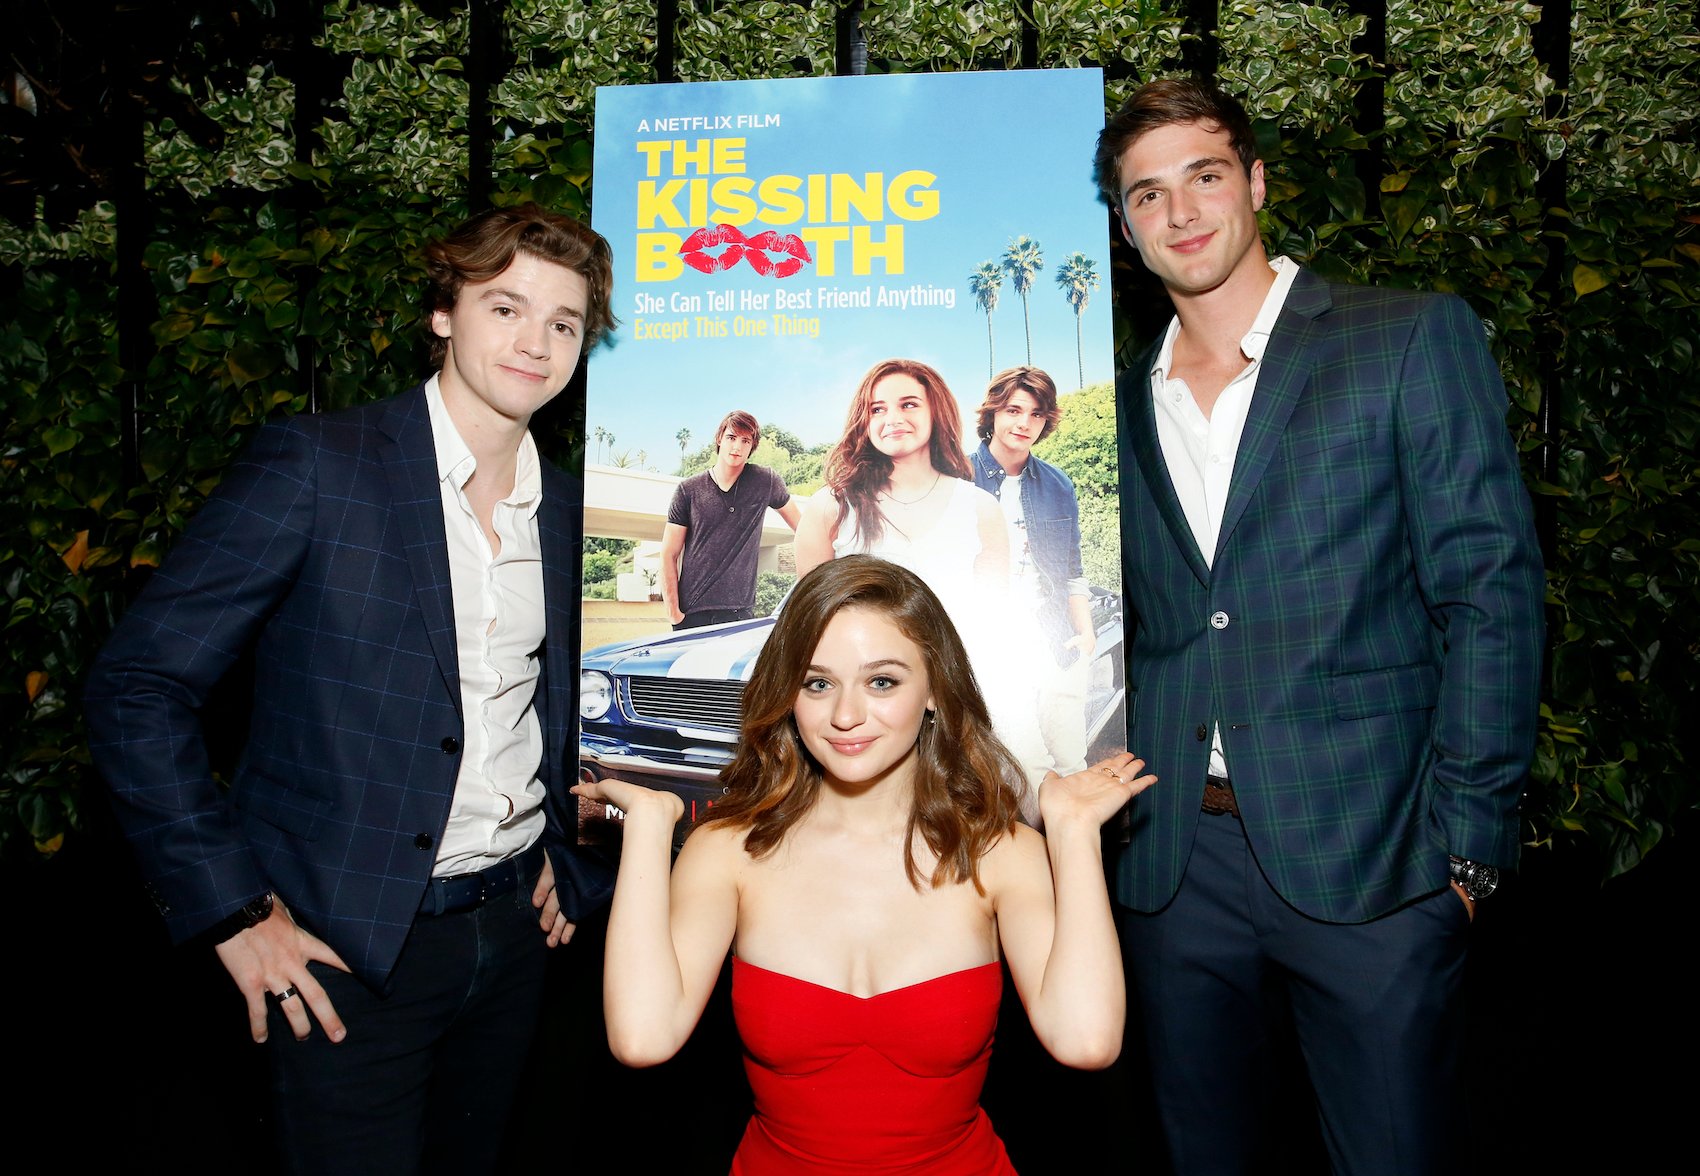 Joel Courtney, Joey King, and Jacob Elordi at a screening of 'The Kissing Booth'